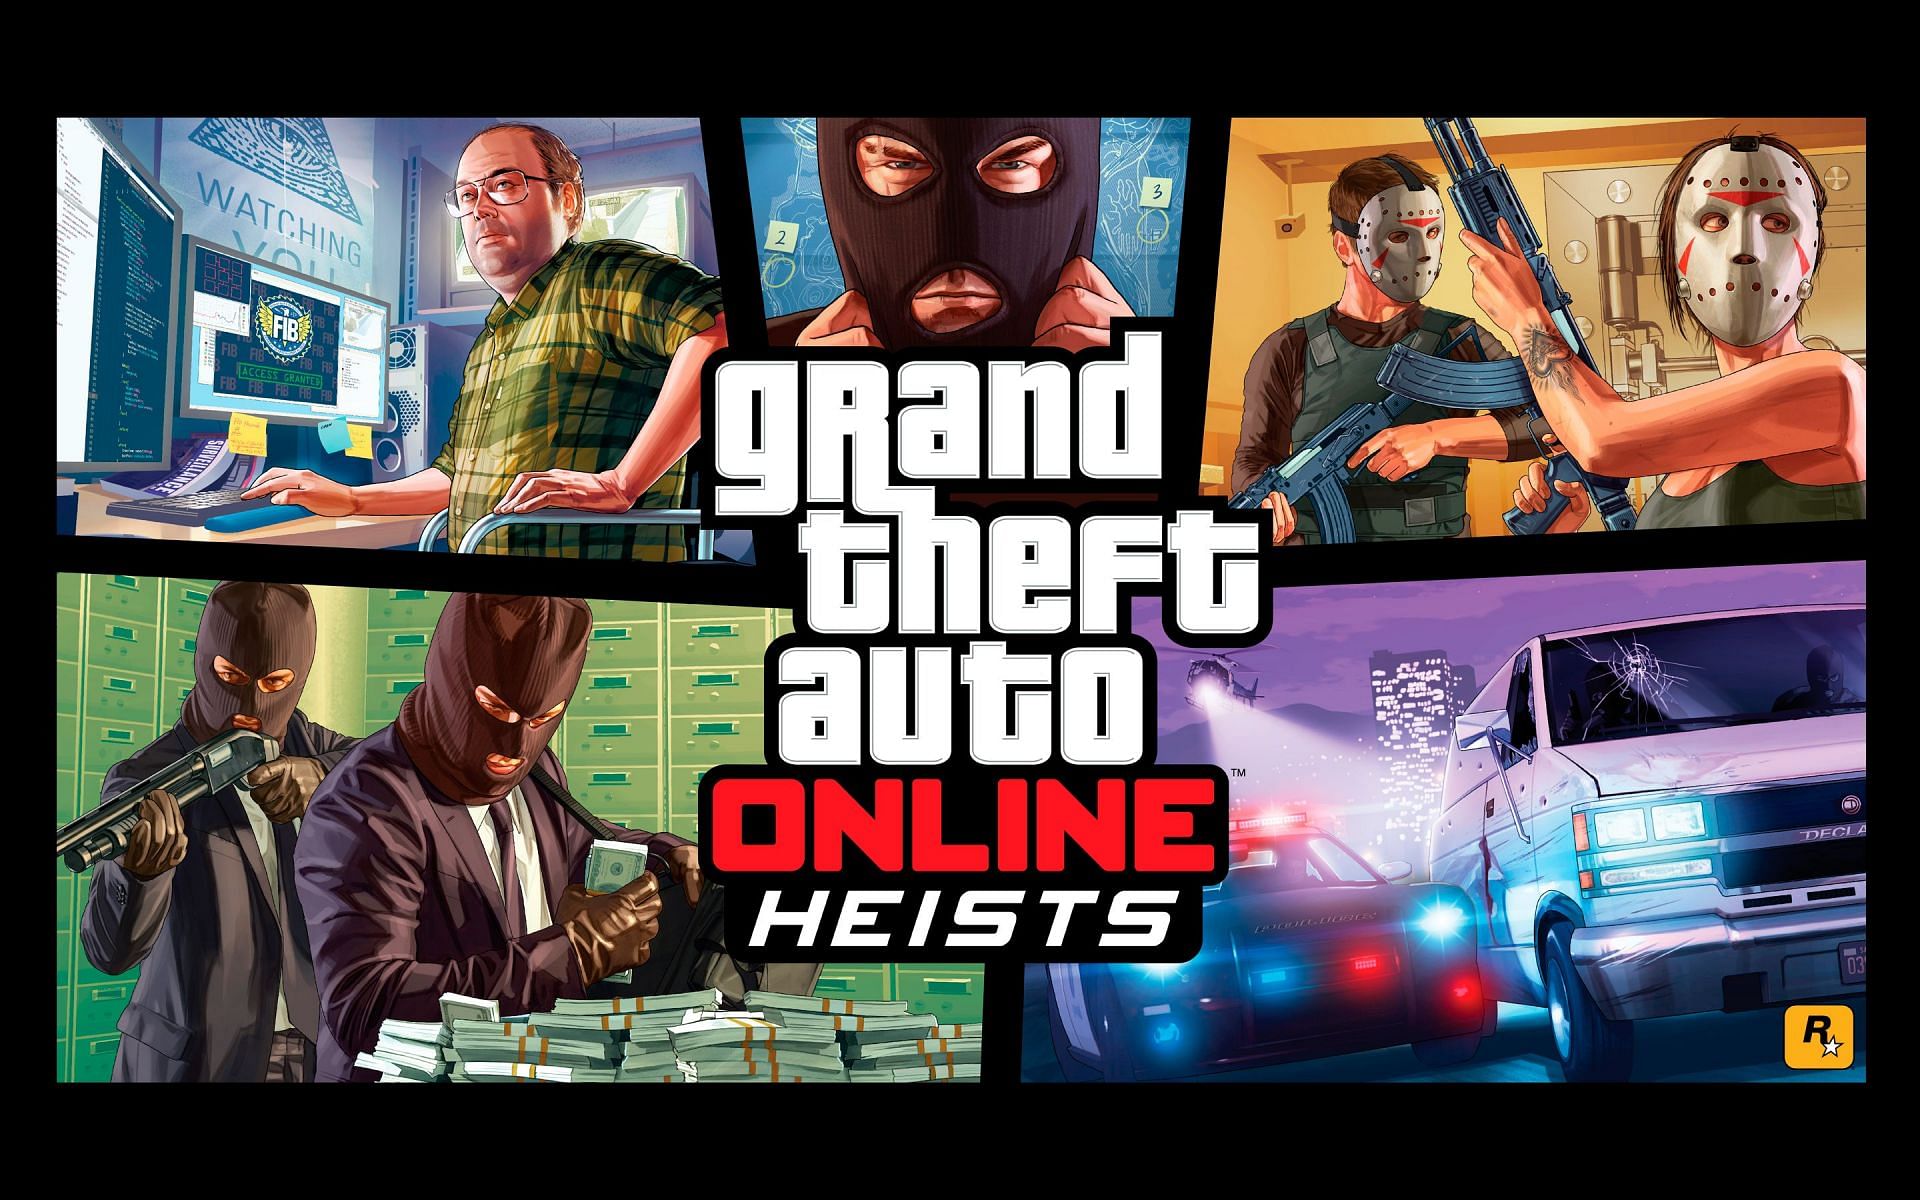 How many heists are in GTA Online?